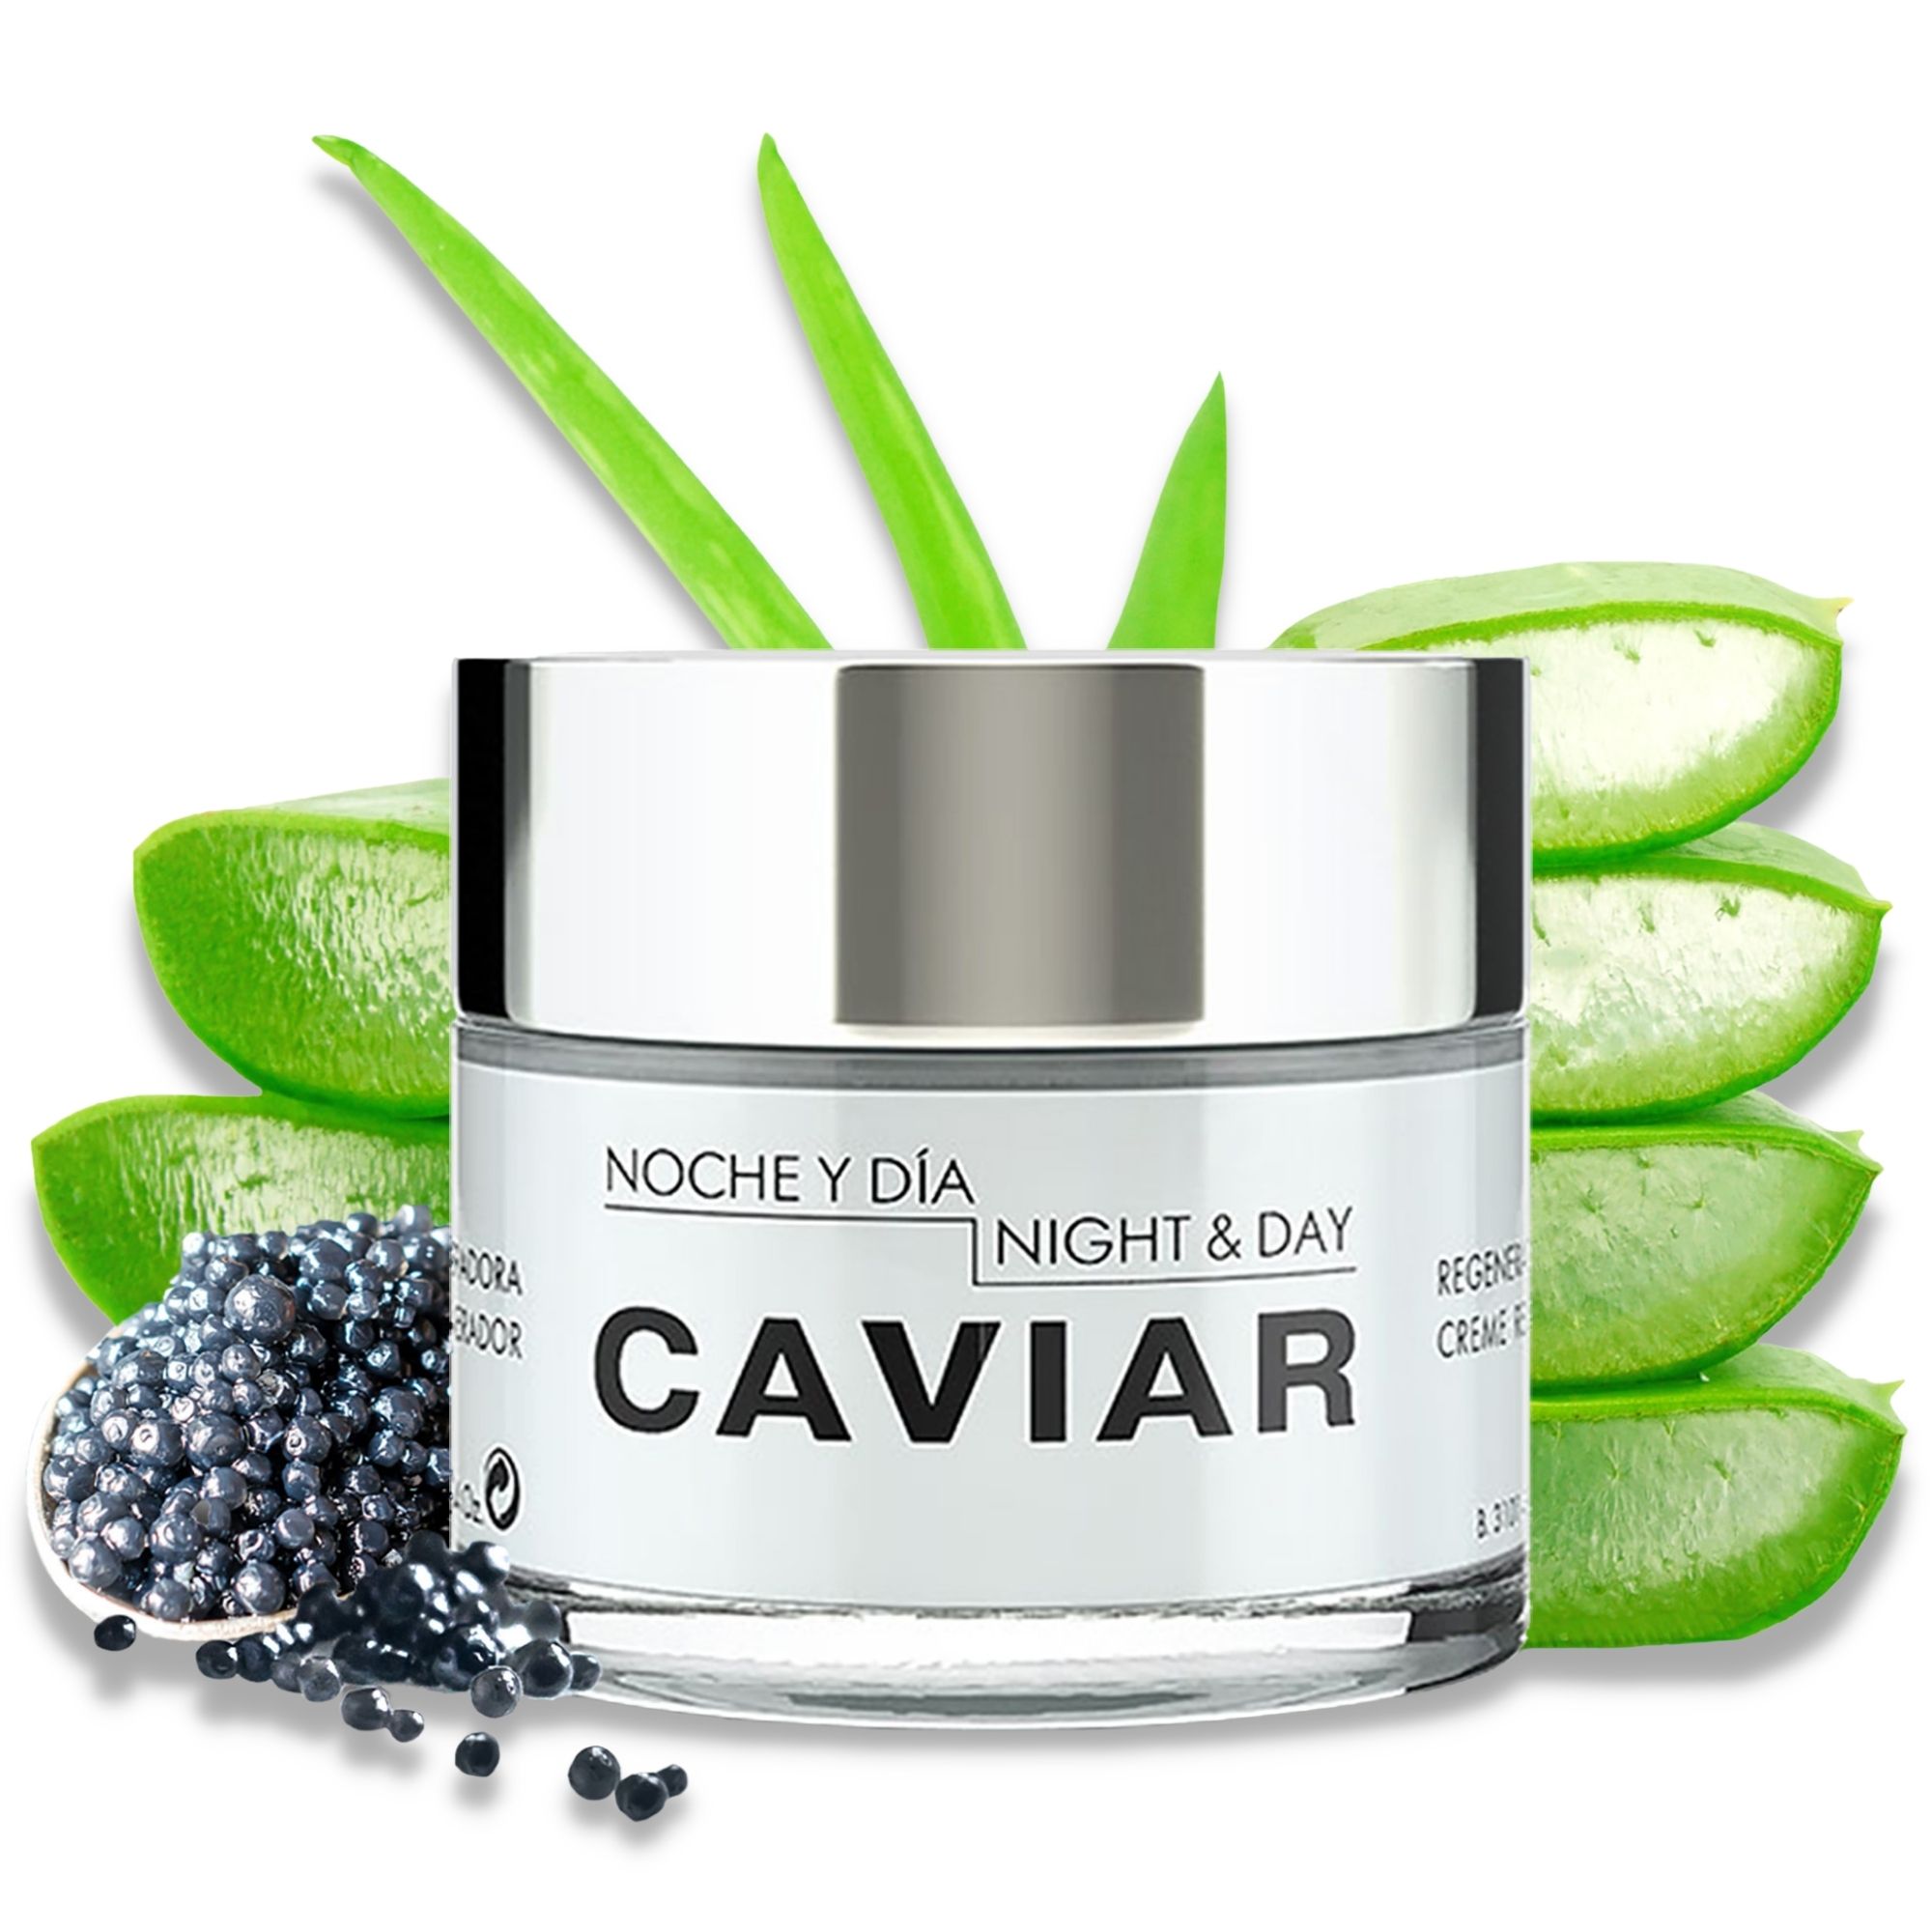 Noche Y Dia Caviar Face Cream - Sturgeon Caviar & Aloe - Daily Anti-Aging Moisturizer To Reduce Of Lines, Blemishes, Discoloration & Wrinkles & Collagen Booster - 2.4 fl